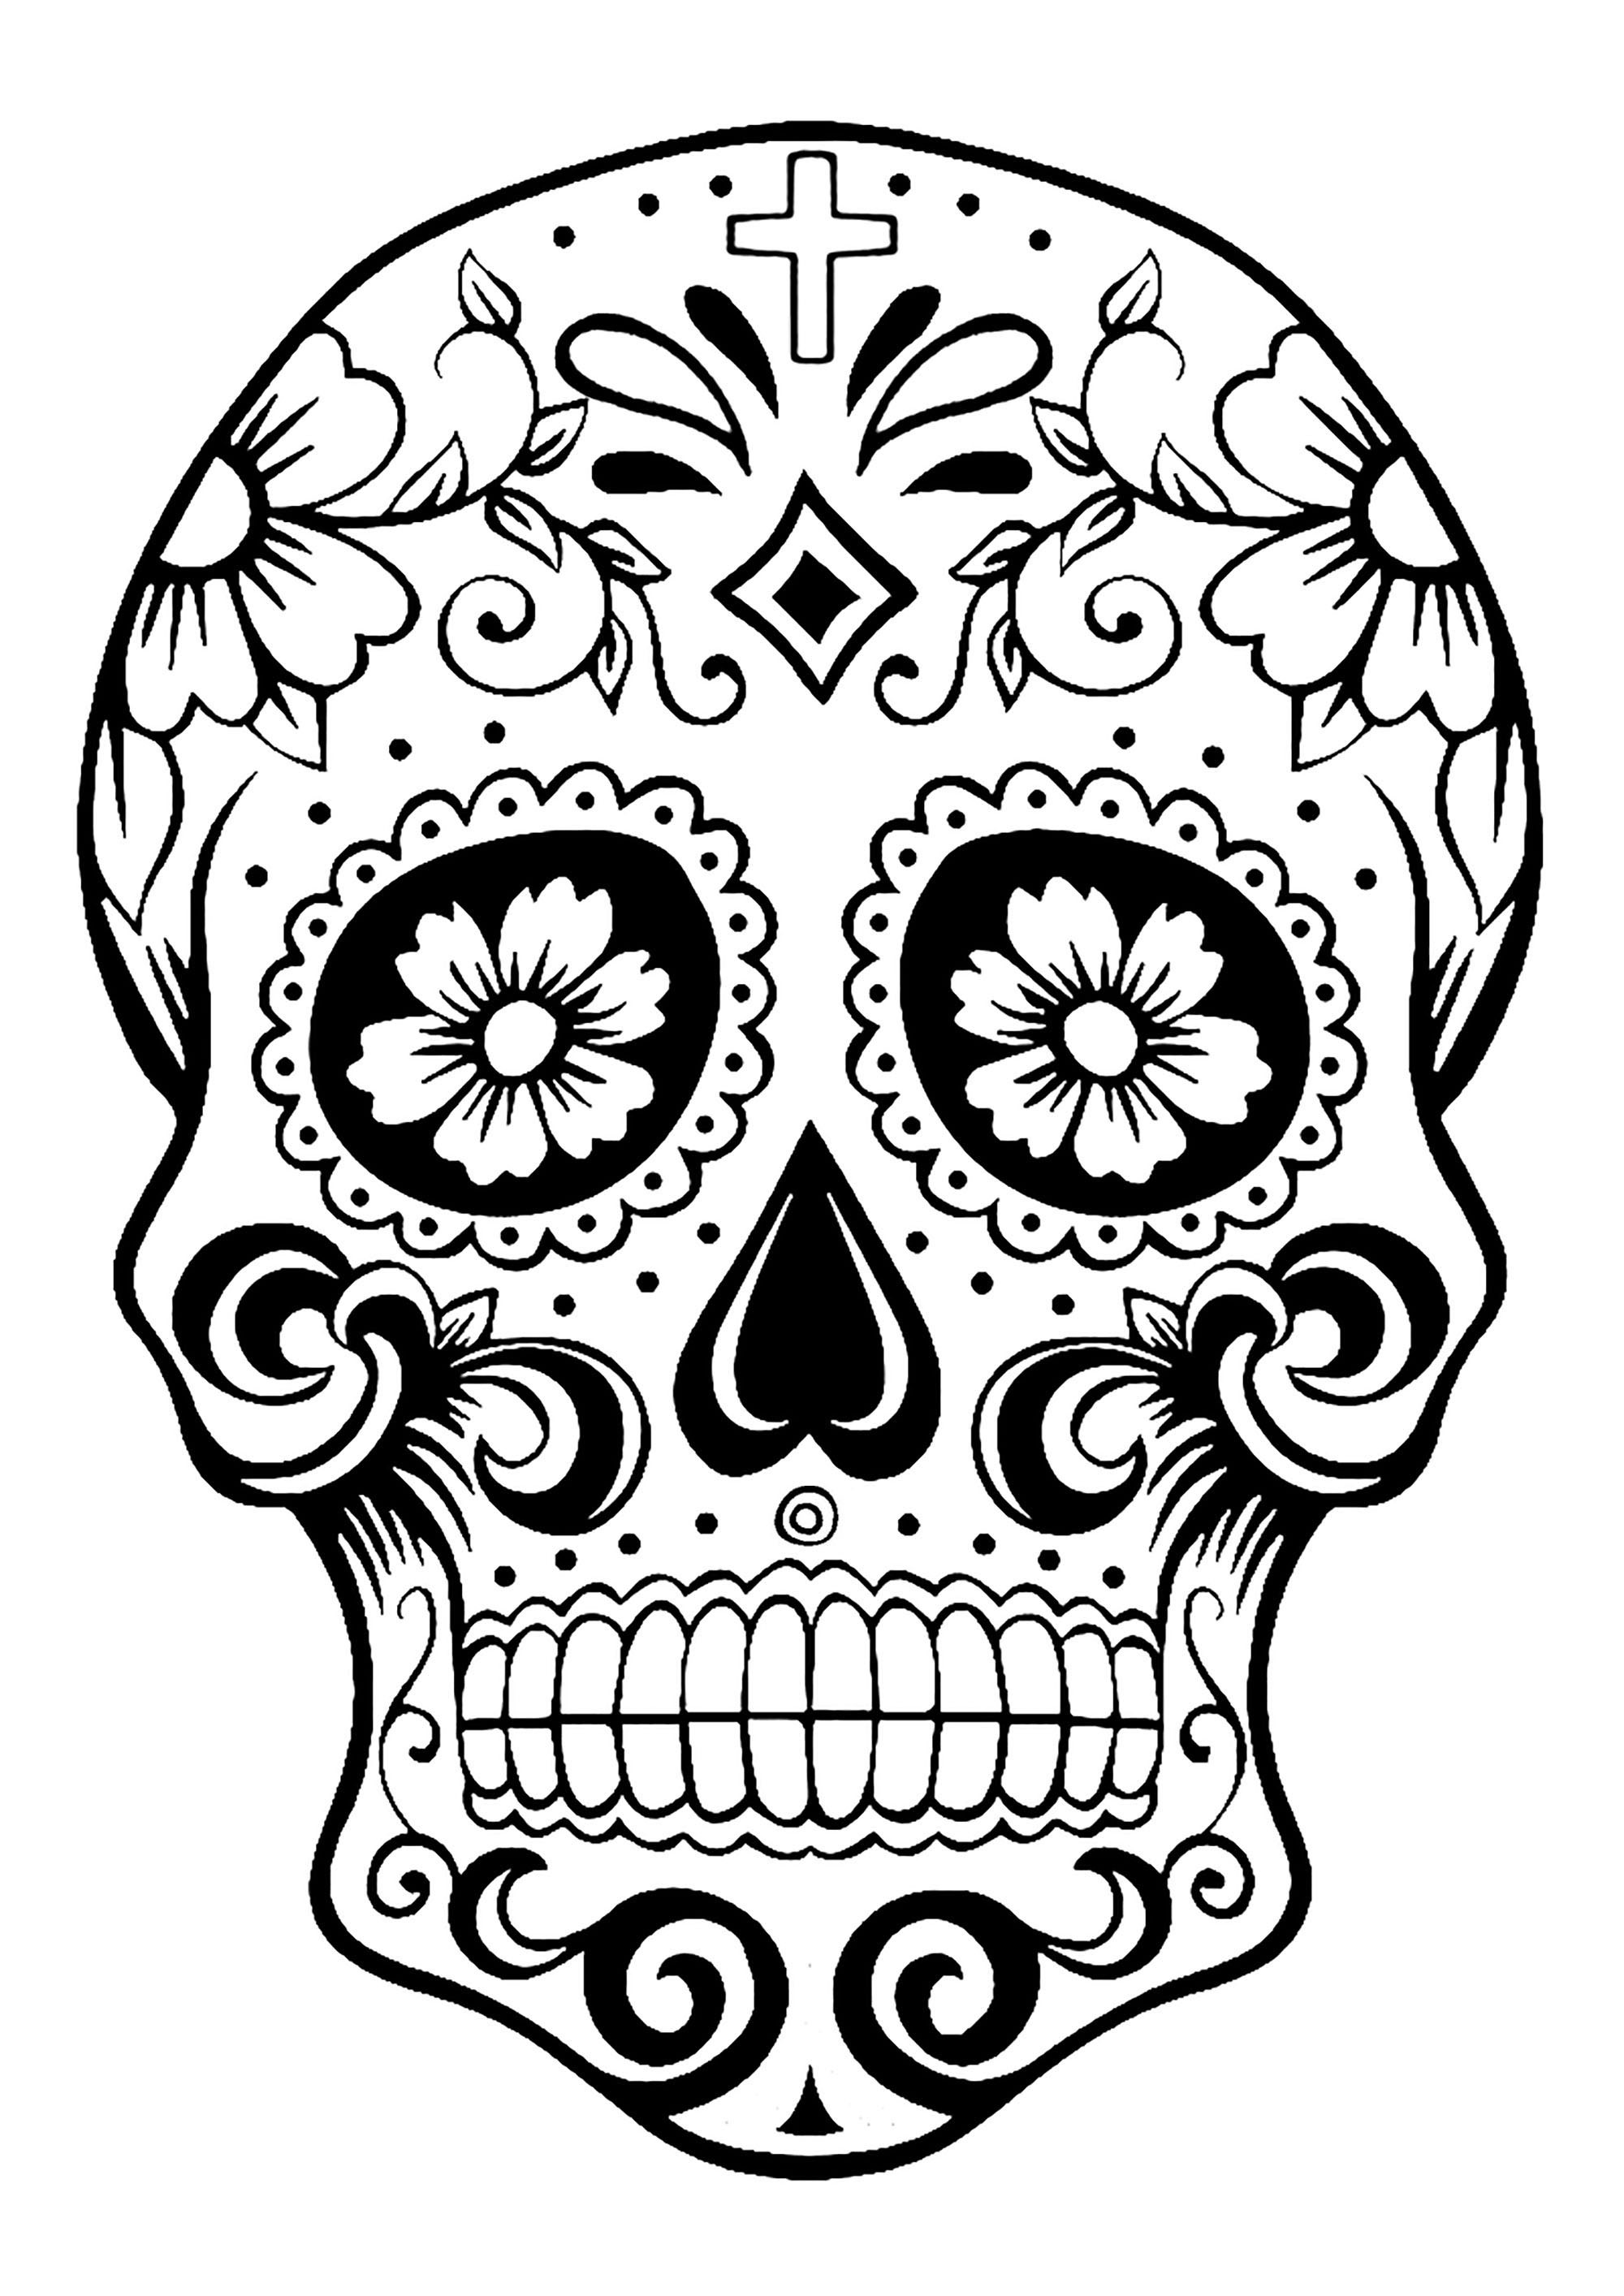 Dia De Los Muertos Coloring Pages
 Skull Coloring Pages for Adults